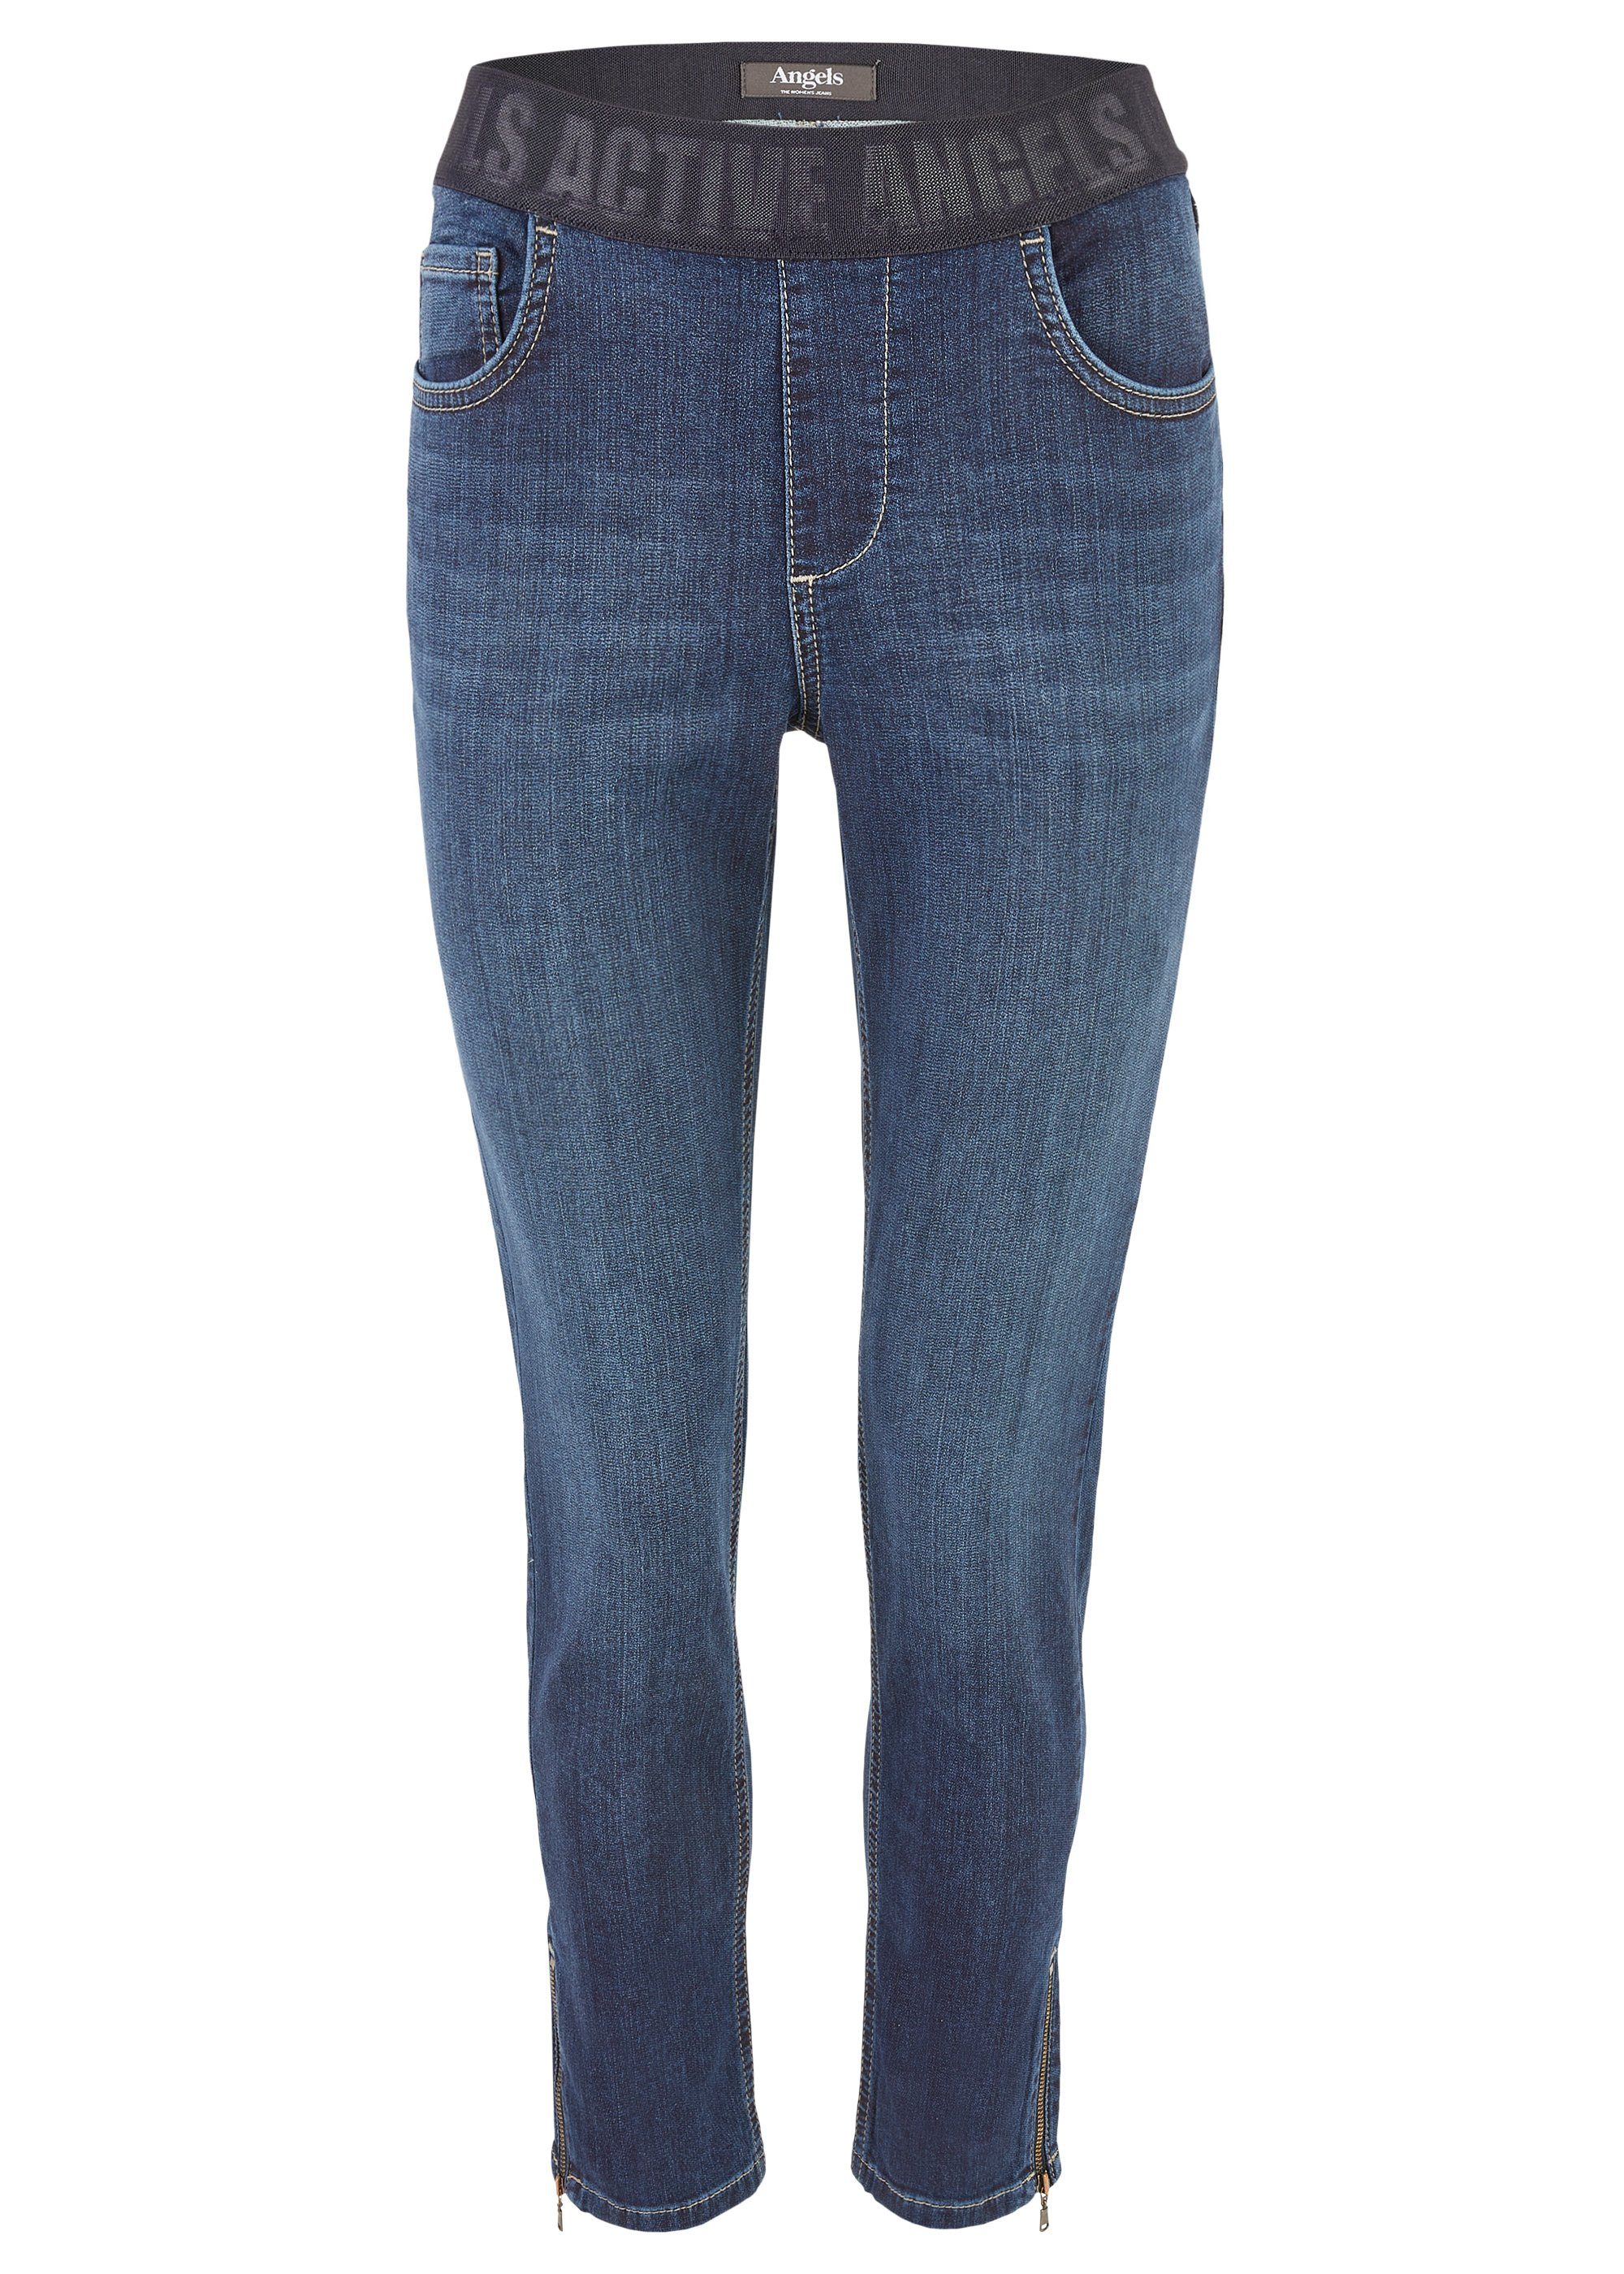 ANGELS Stretch-Jeans ANGELS JEANS SKINNY SHAPE ZIP night blue used 585 120500.305 - STRETCH